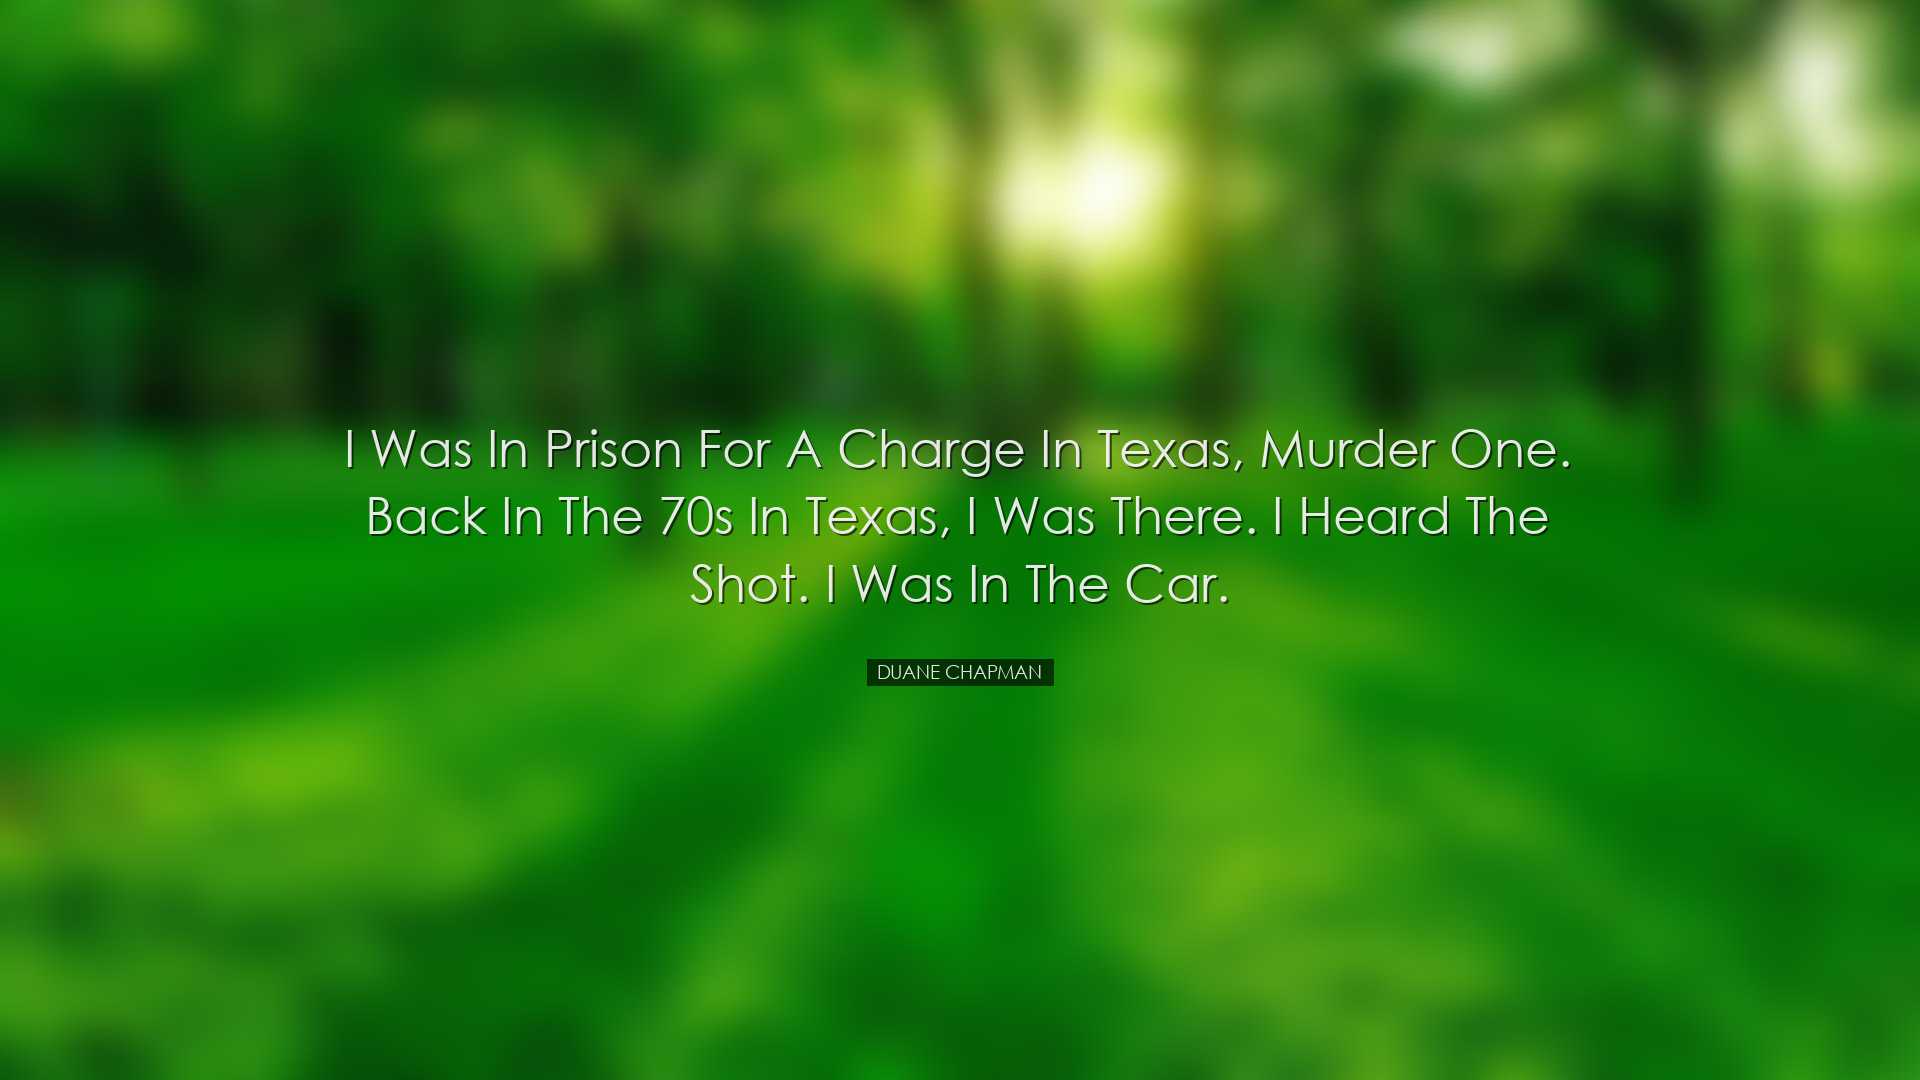 I was in prison for a charge in Texas, murder one. Back in the 70s